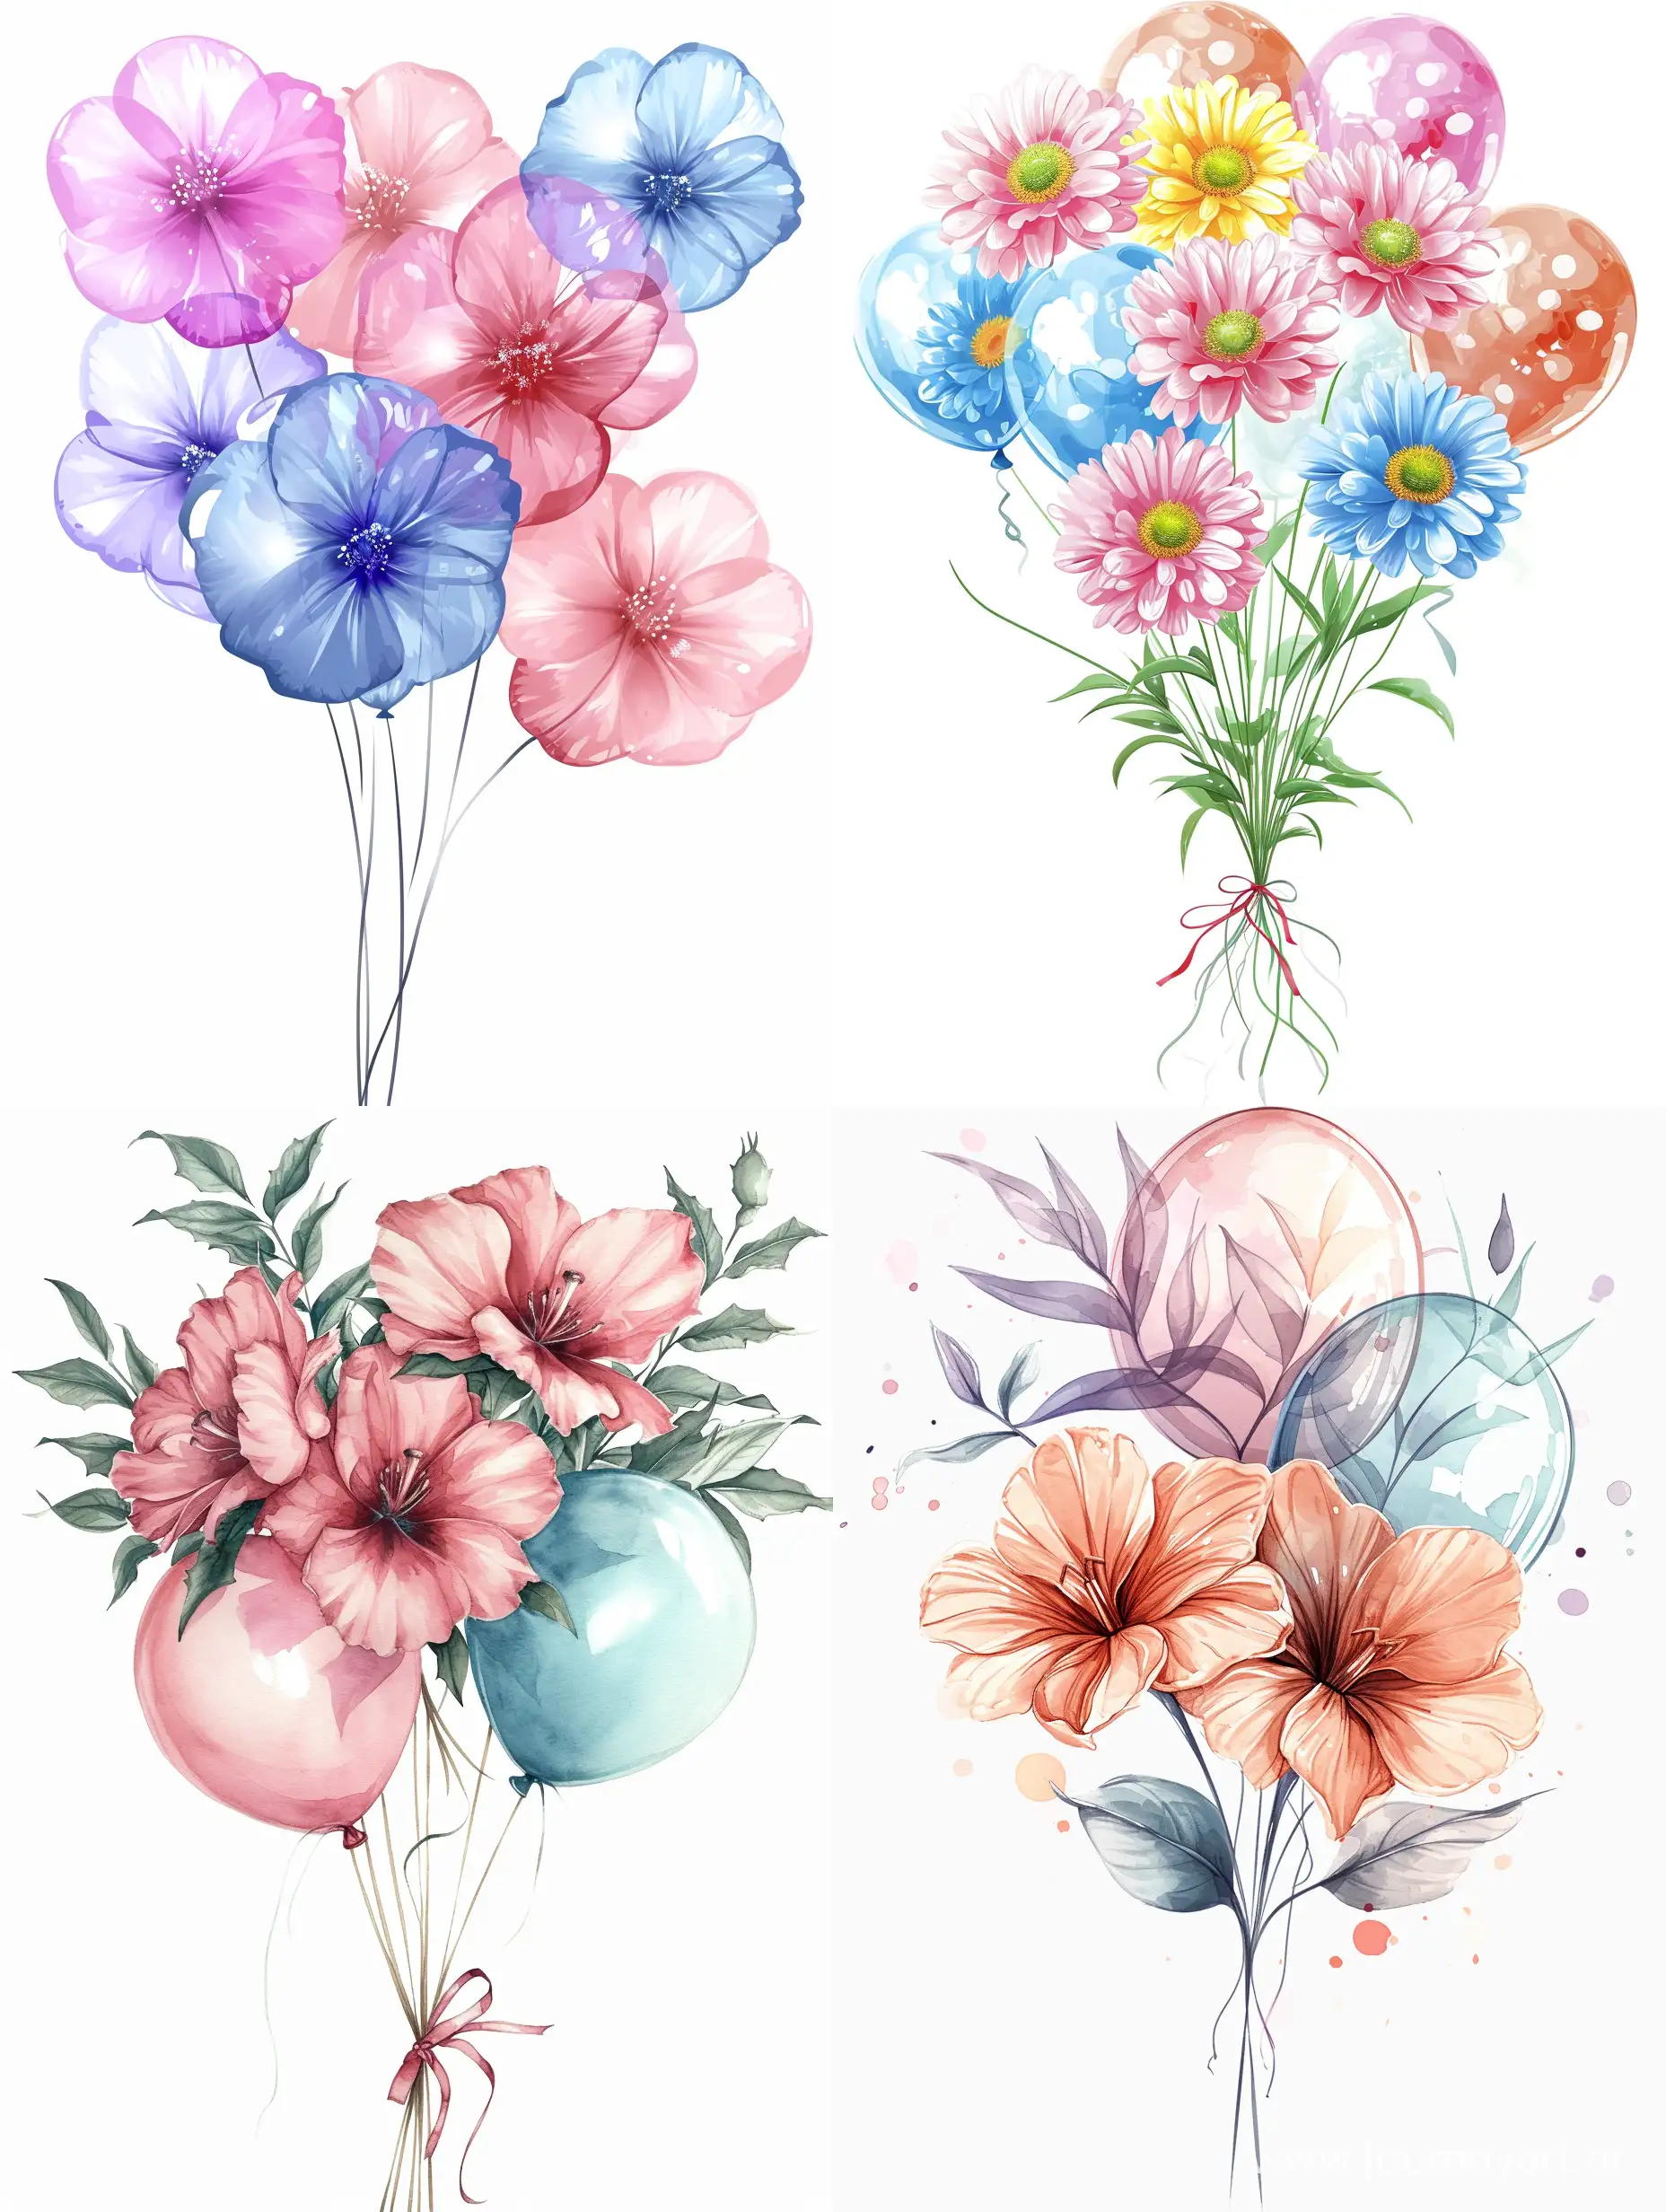 Festive-Hyperrealism-Blooms-Balloons-and-Decorations-in-Light-Tones